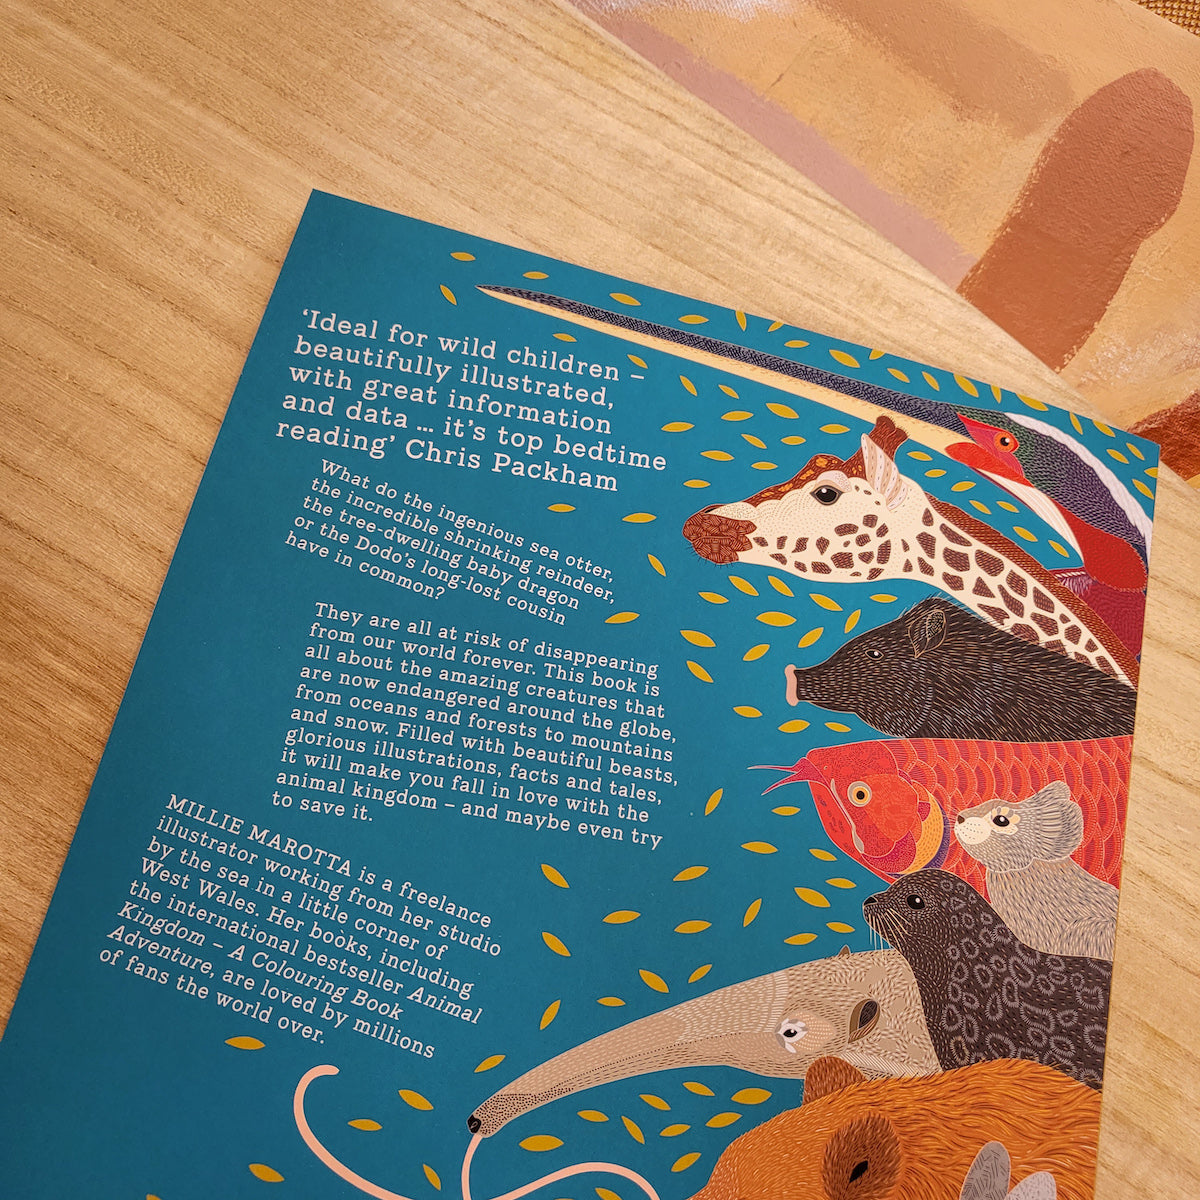 Image of the back cover of a children's book about A Wild Childs Guide to Endangered Animals.